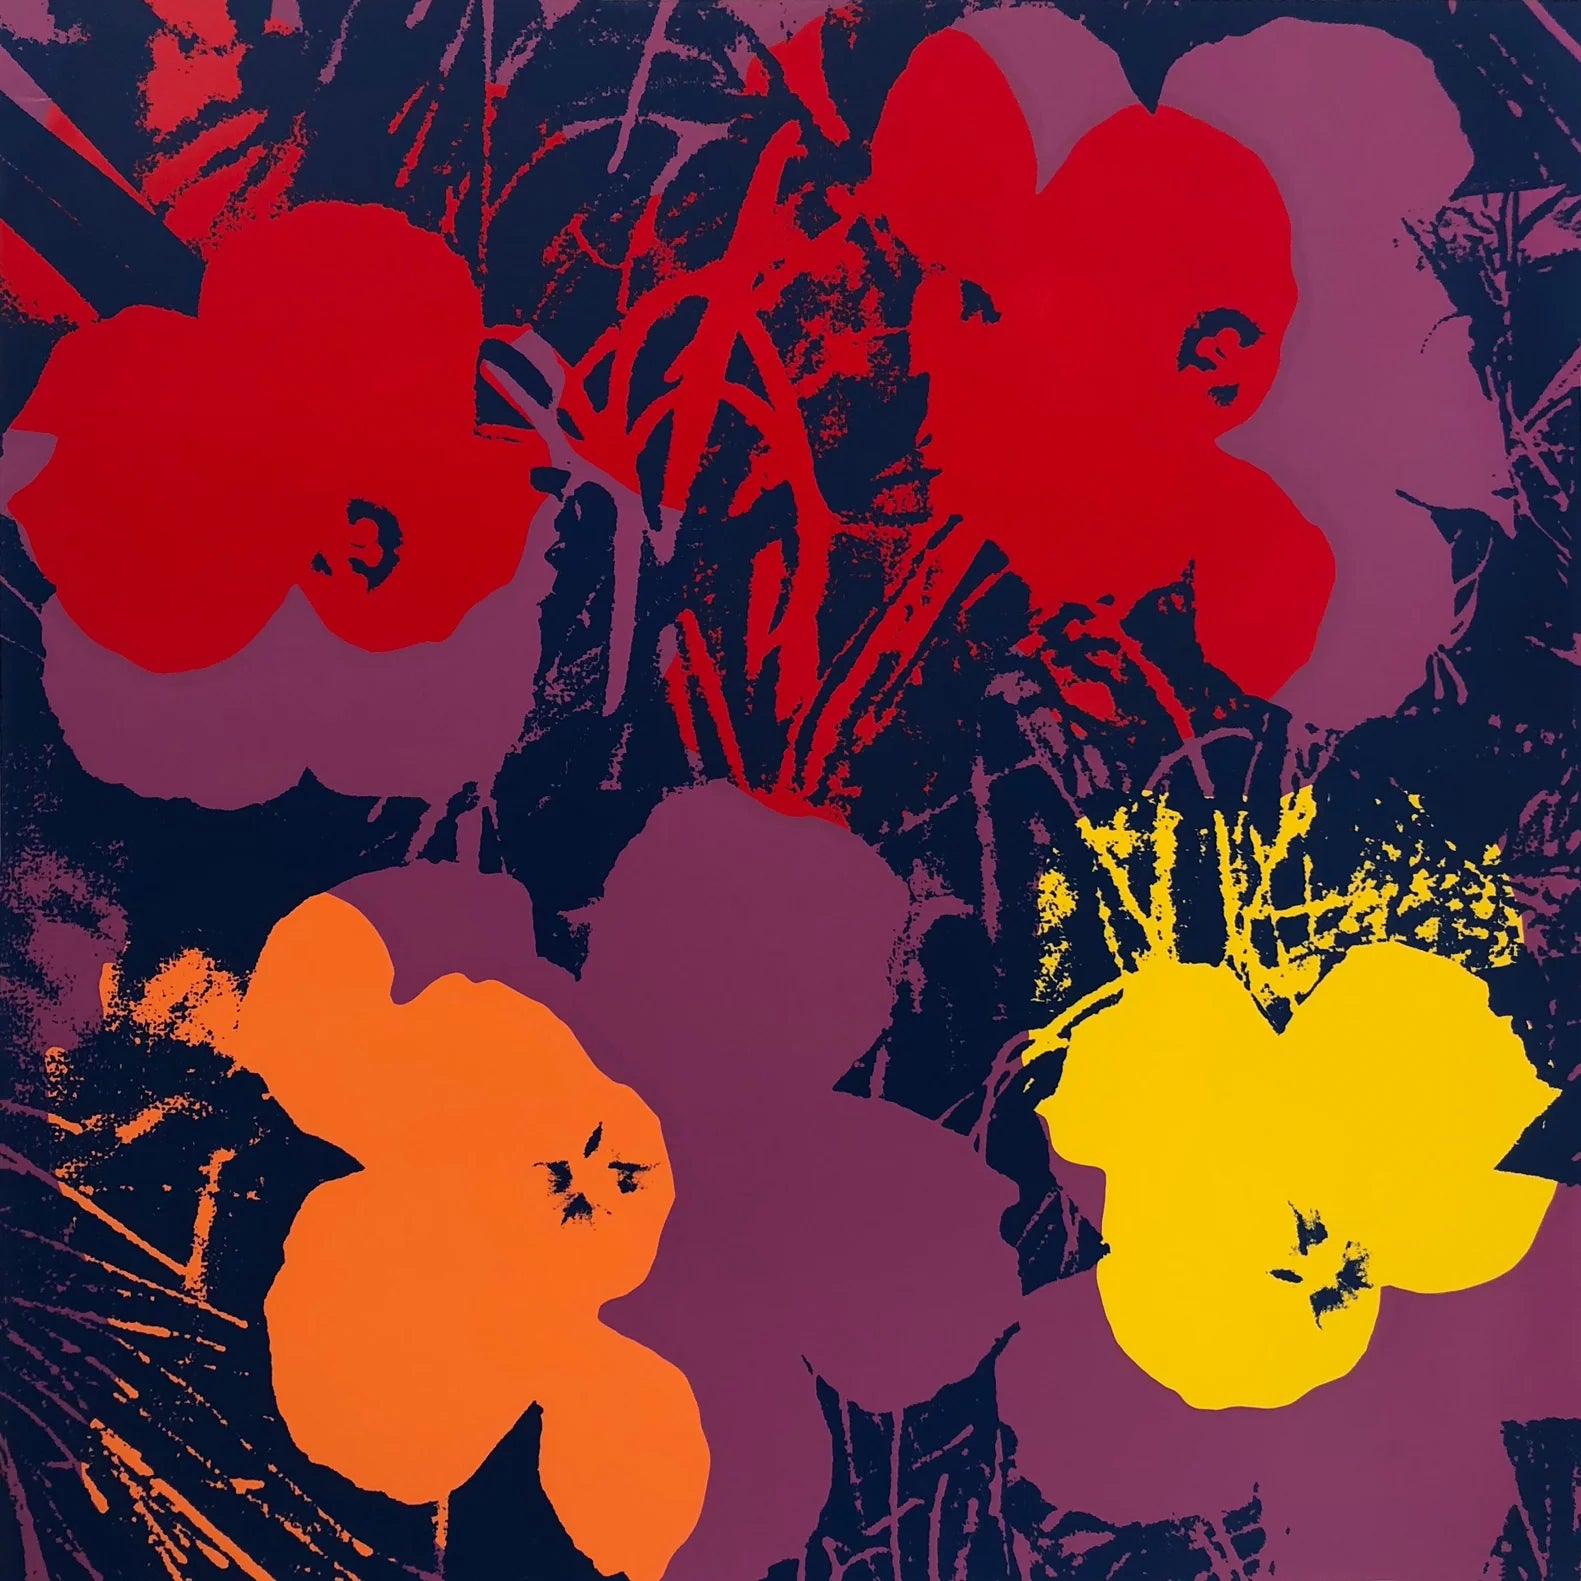 An image of an artwork by Andy Warhol titled 'Flowers 11:66' featuring Andy Warhol's iconic flowers screenprint in navy, purple, red, orange, and yellow. this is a sunday b morning print for sale.